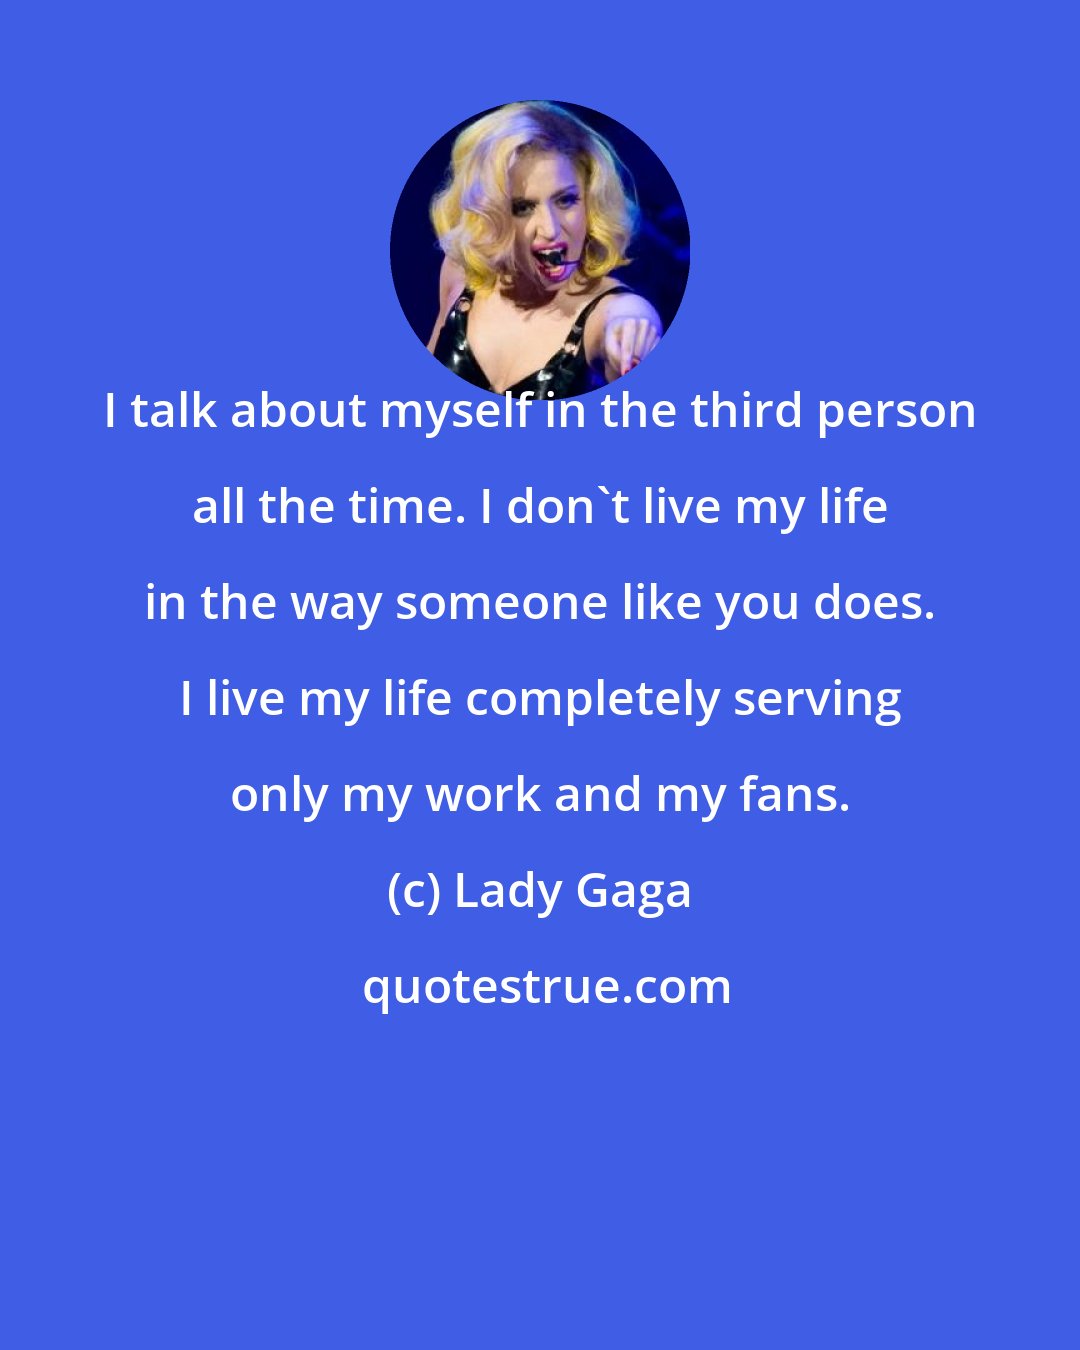 Lady Gaga: I talk about myself in the third person all the time. I don't live my life in the way someone like you does. I live my life completely serving only my work and my fans.